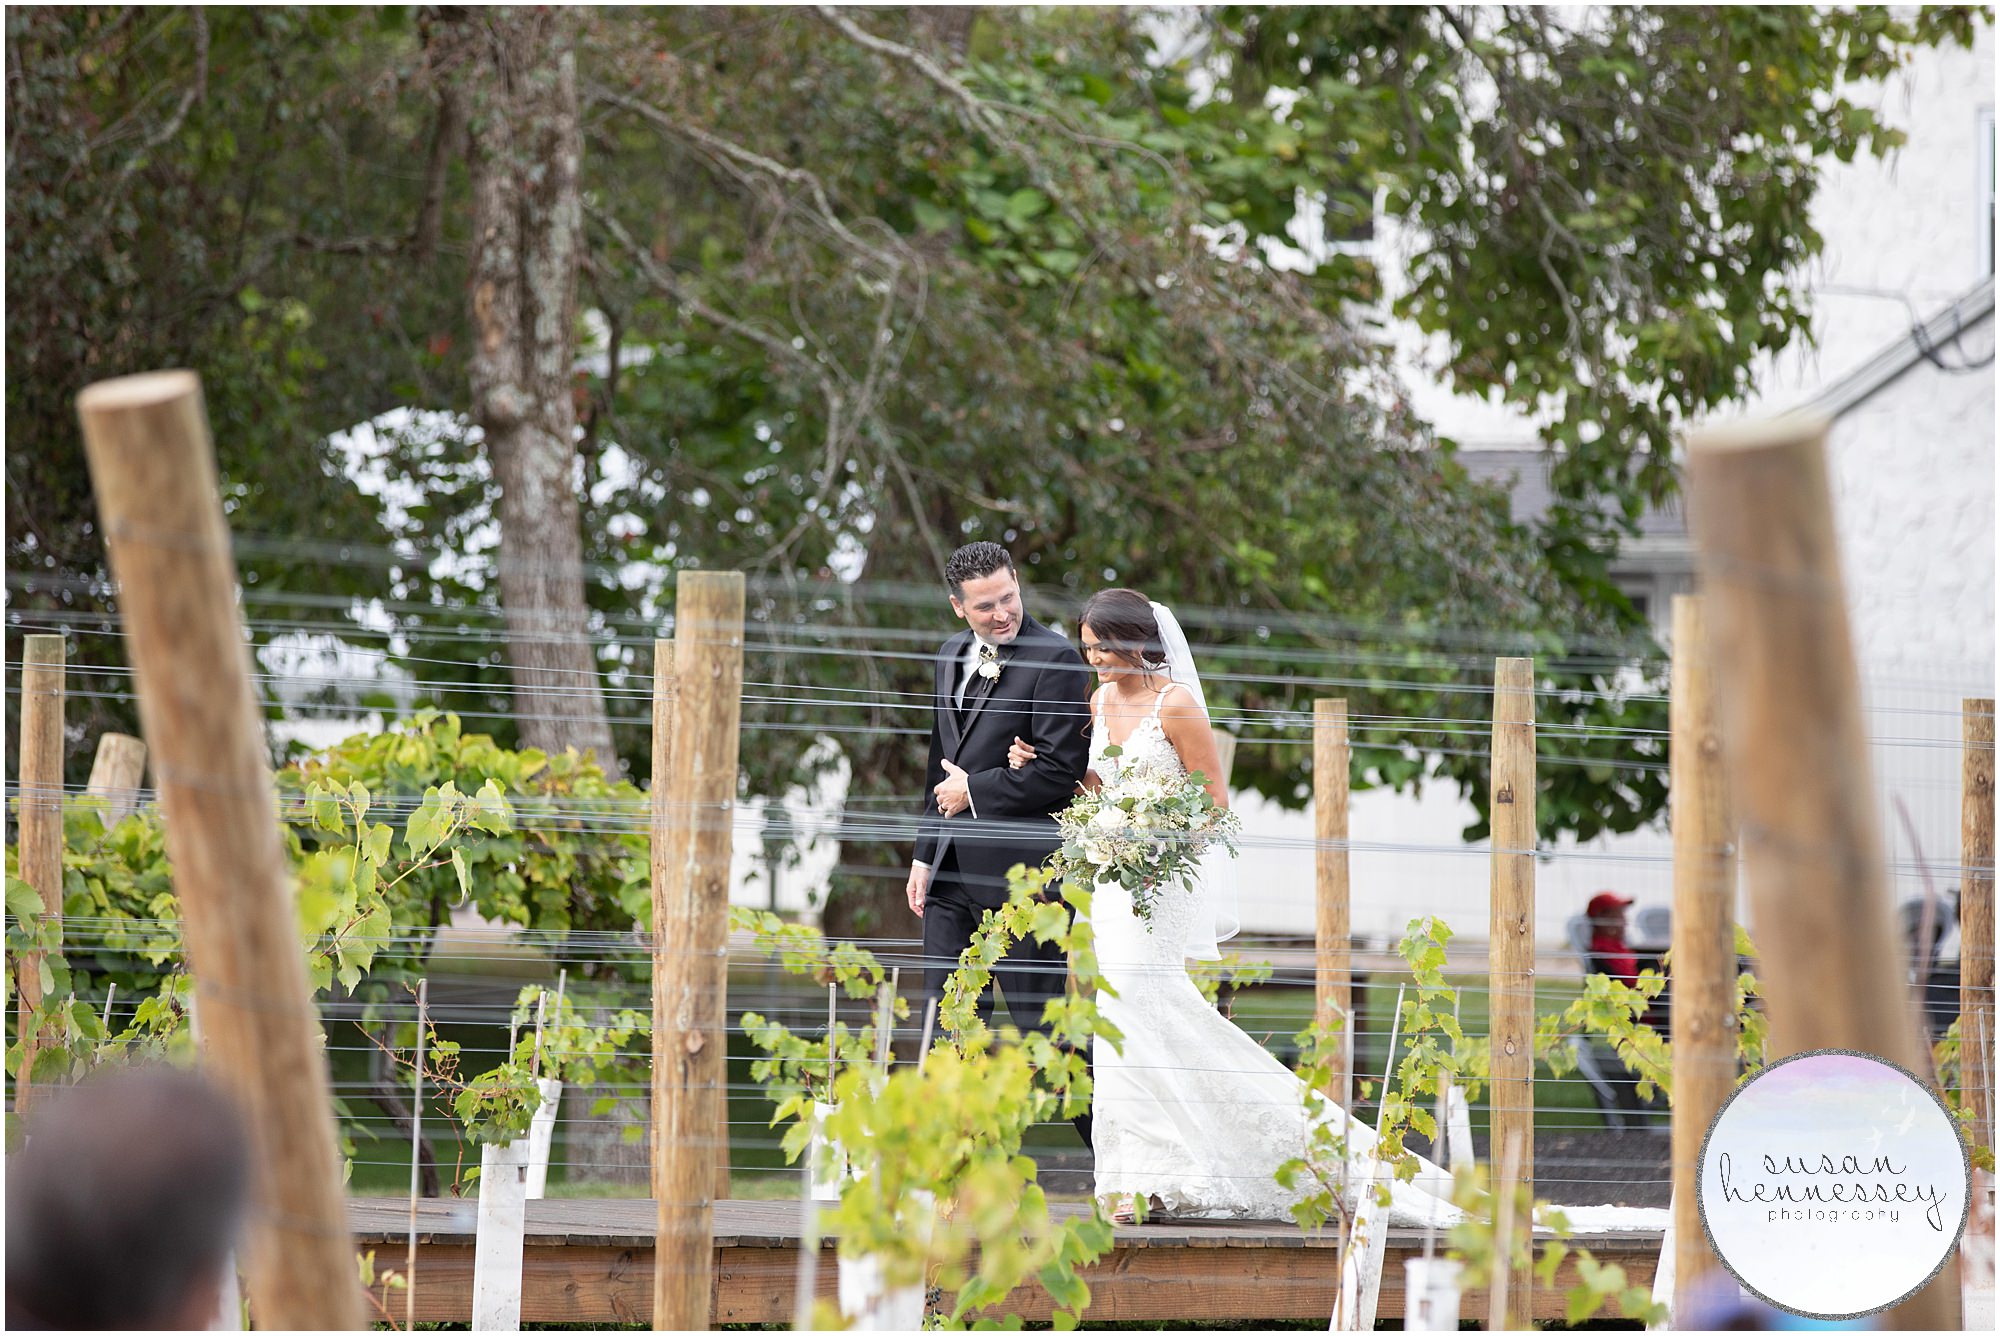 Ceremony at Renault Winery wedding in Egg Harbor City, NJ